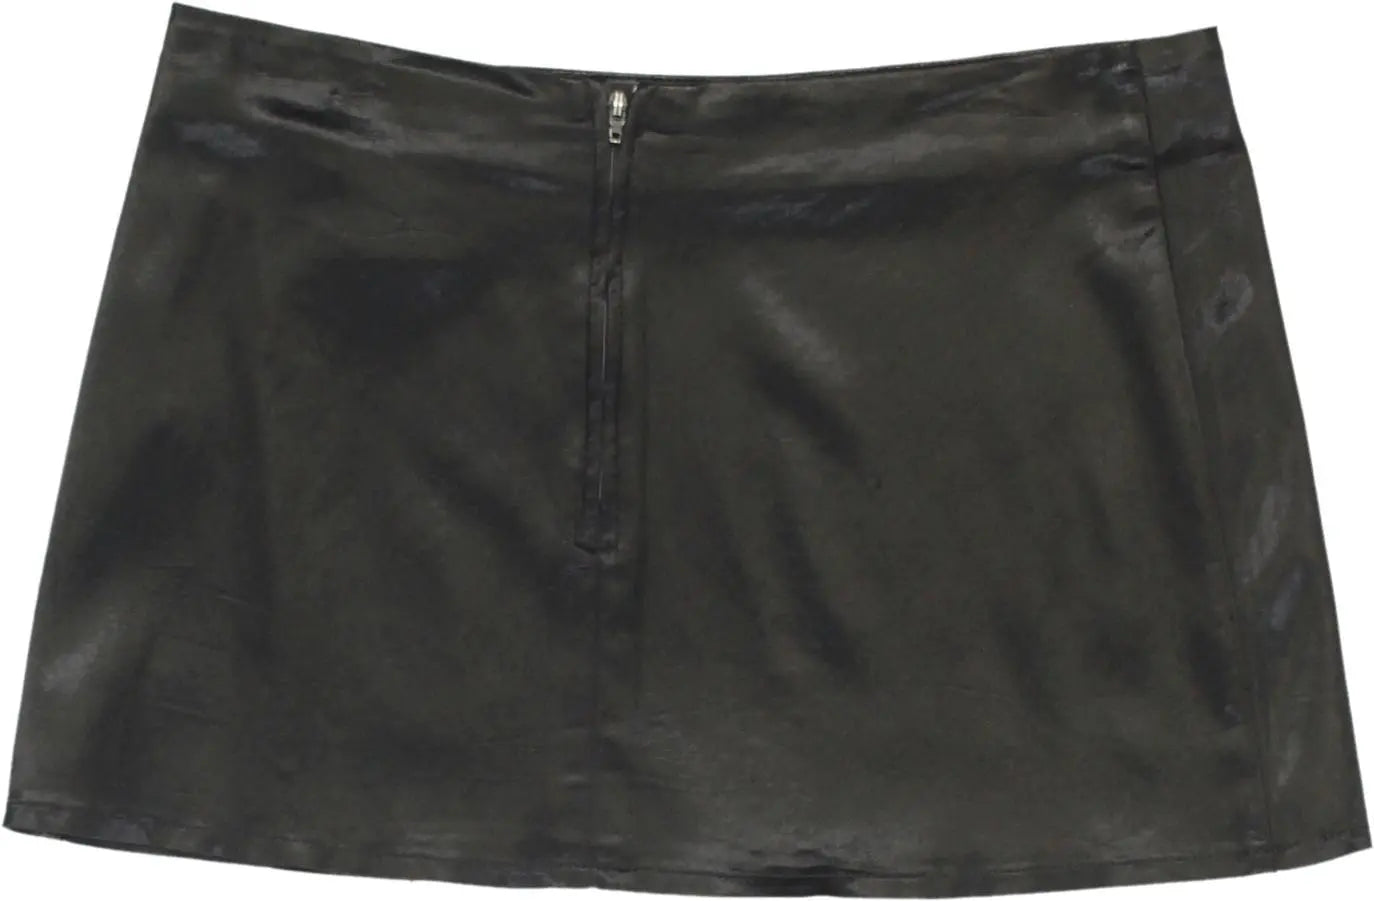 Atomic Kitten - 00s Satin Mini Skirt- ThriftTale.com - Vintage and second handclothing